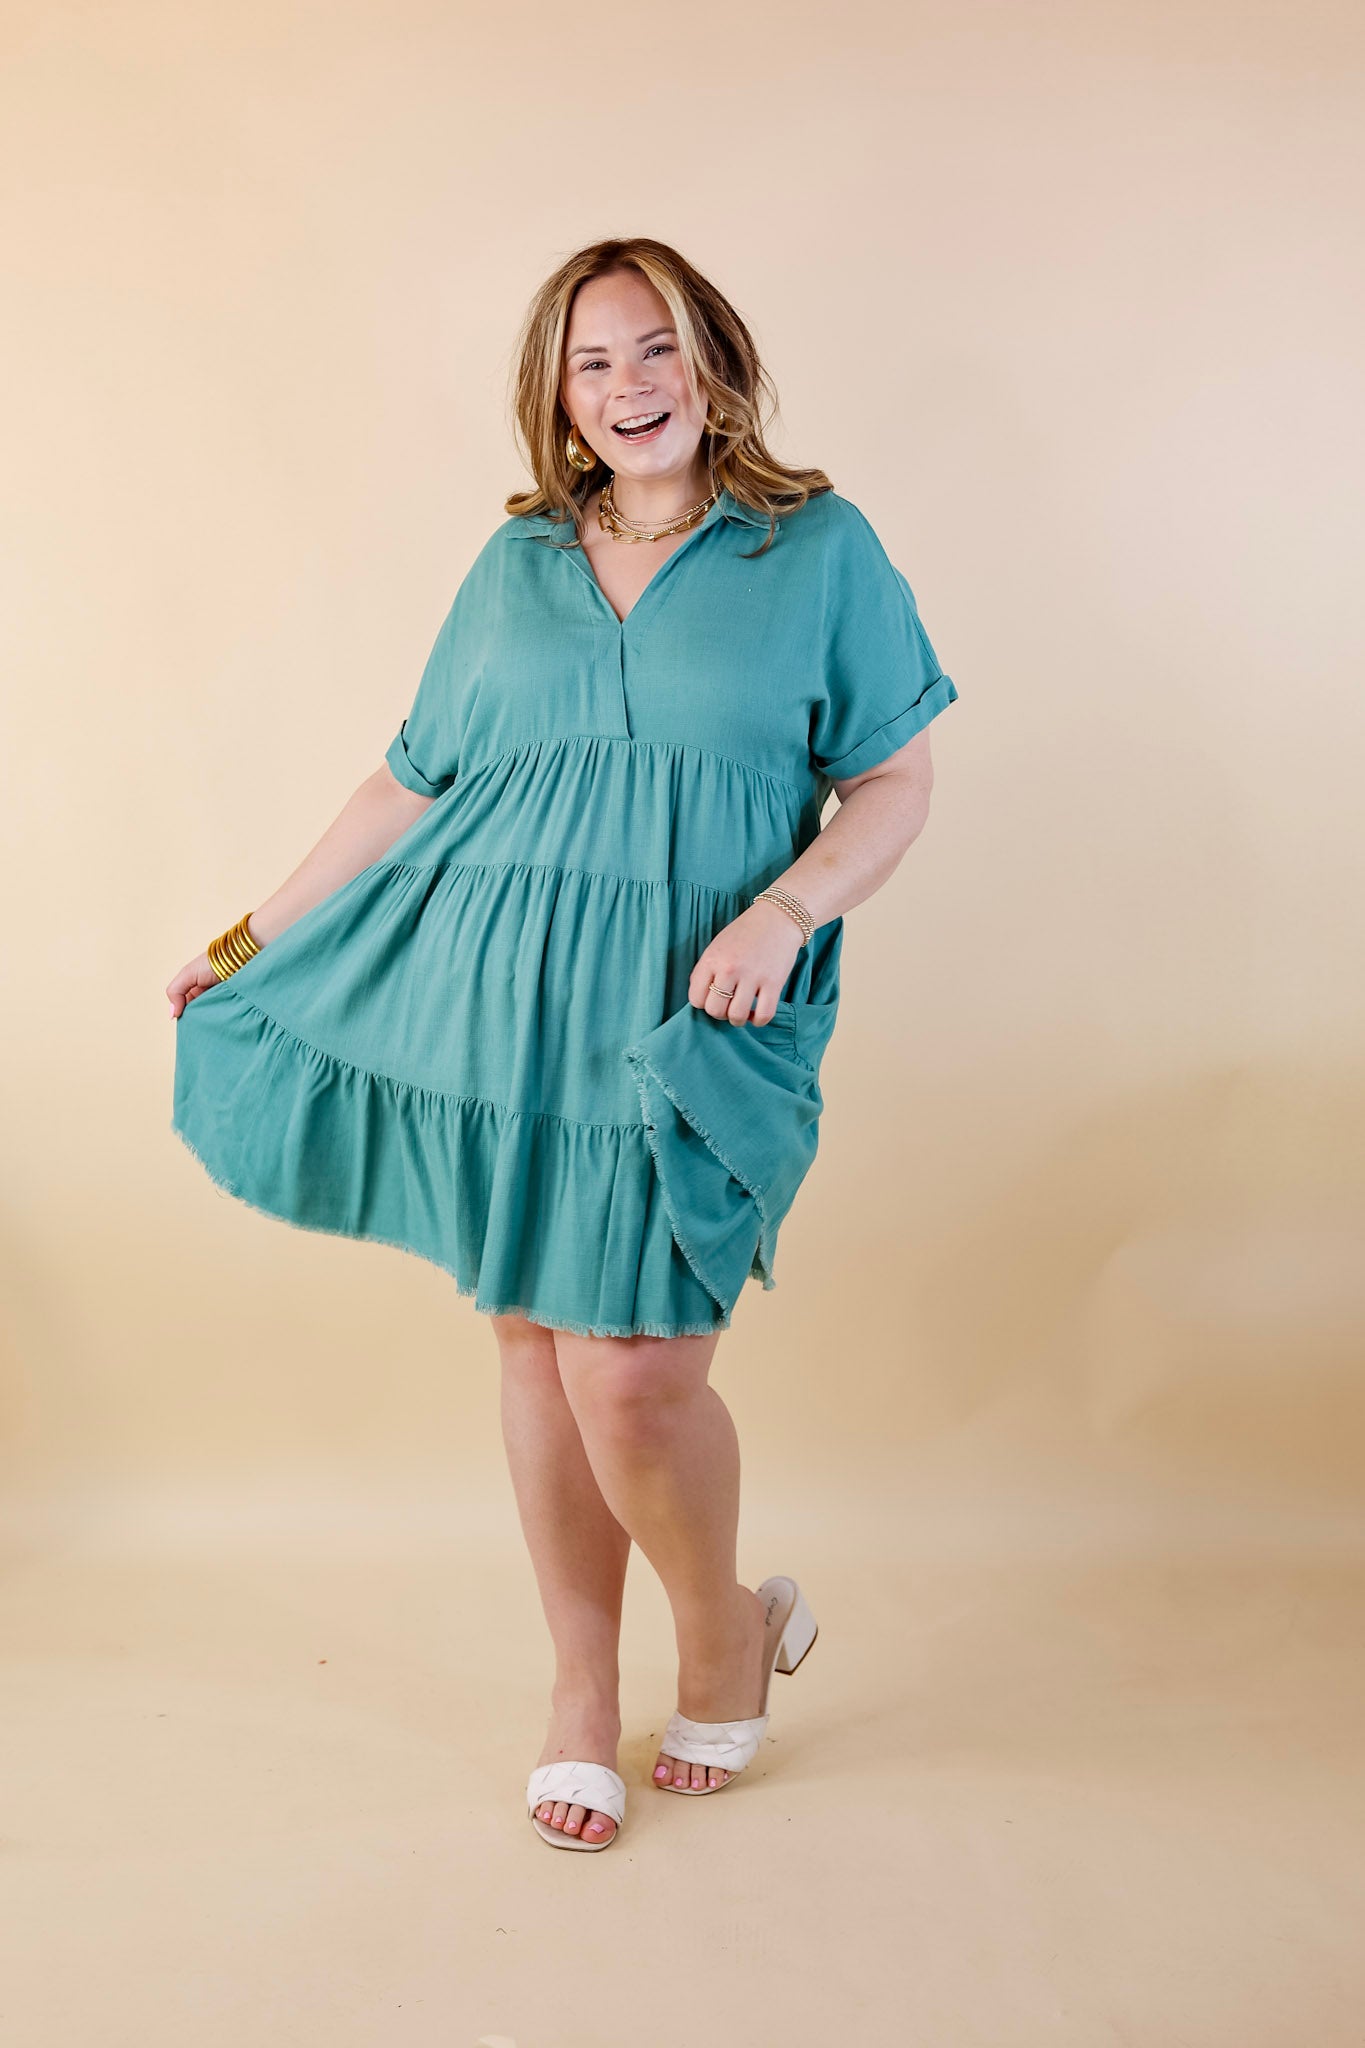 Taos Transitions Ruffle Tiered Collared Dress with Frayed Hem in Turquoise - Giddy Up Glamour Boutique